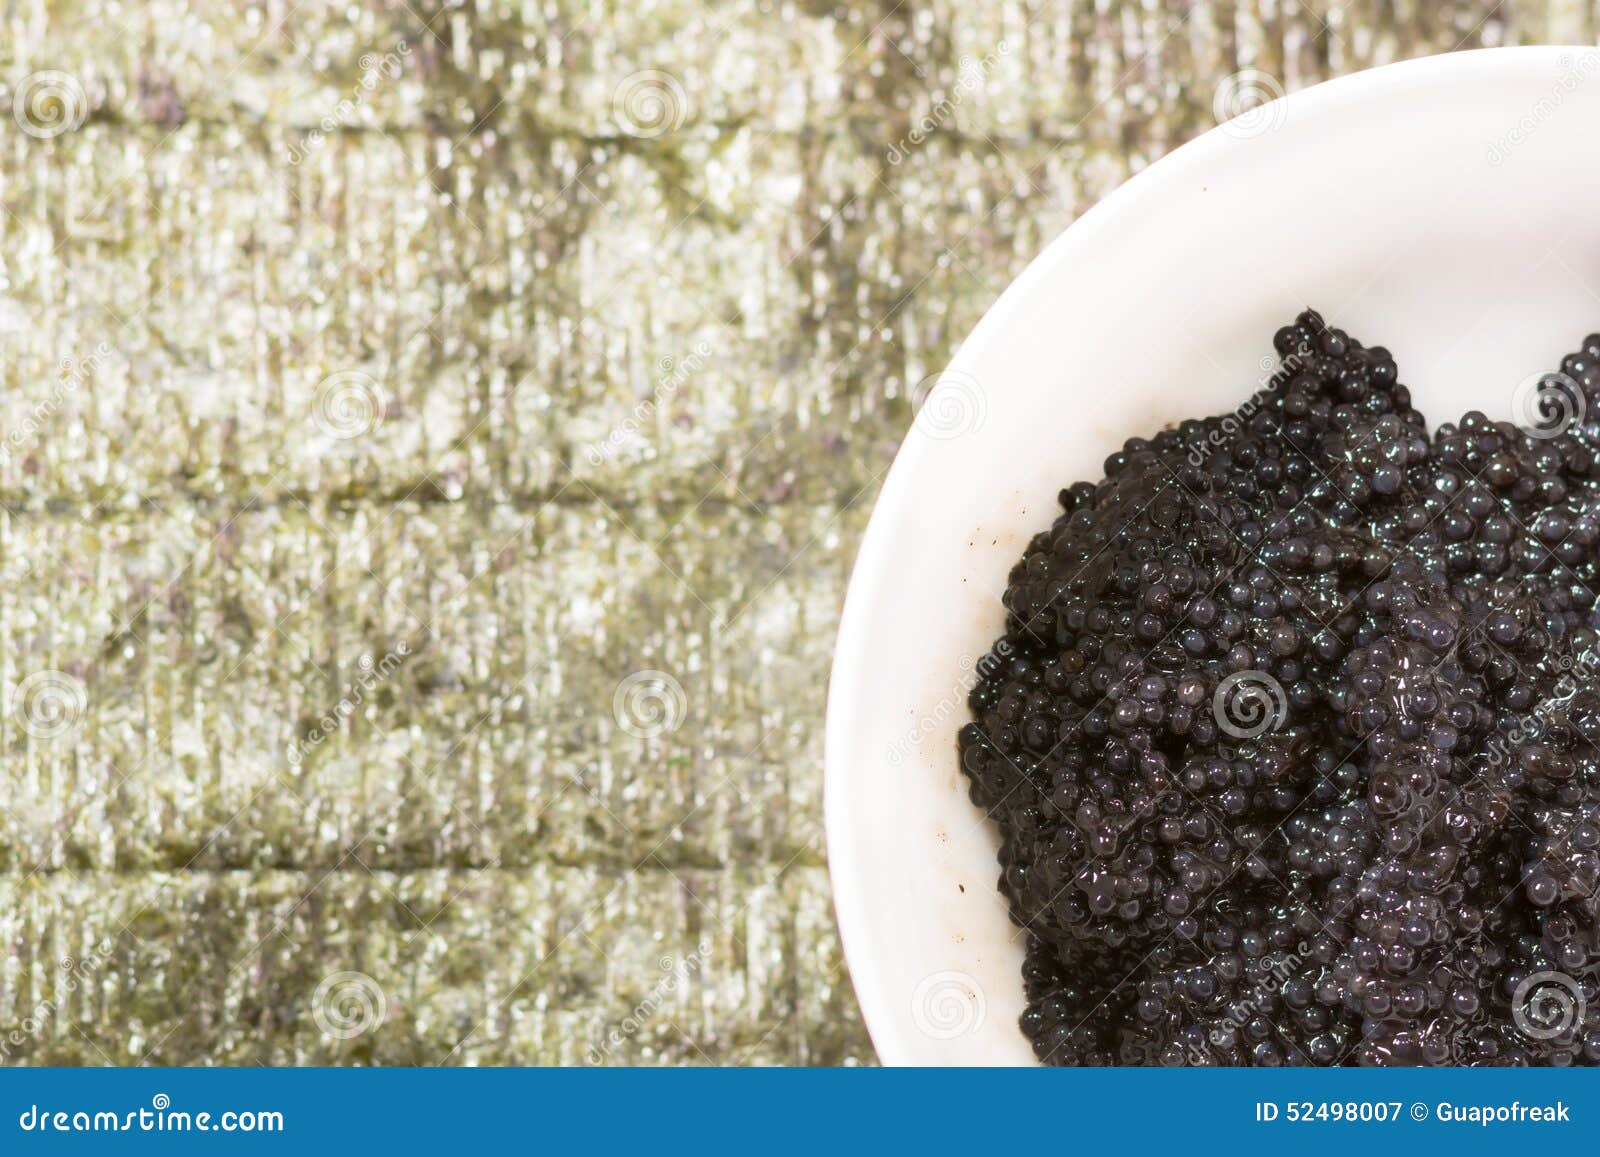 Fresh Black Caviar in a Bowl To Make Sushi and Stock Image - Image of ...